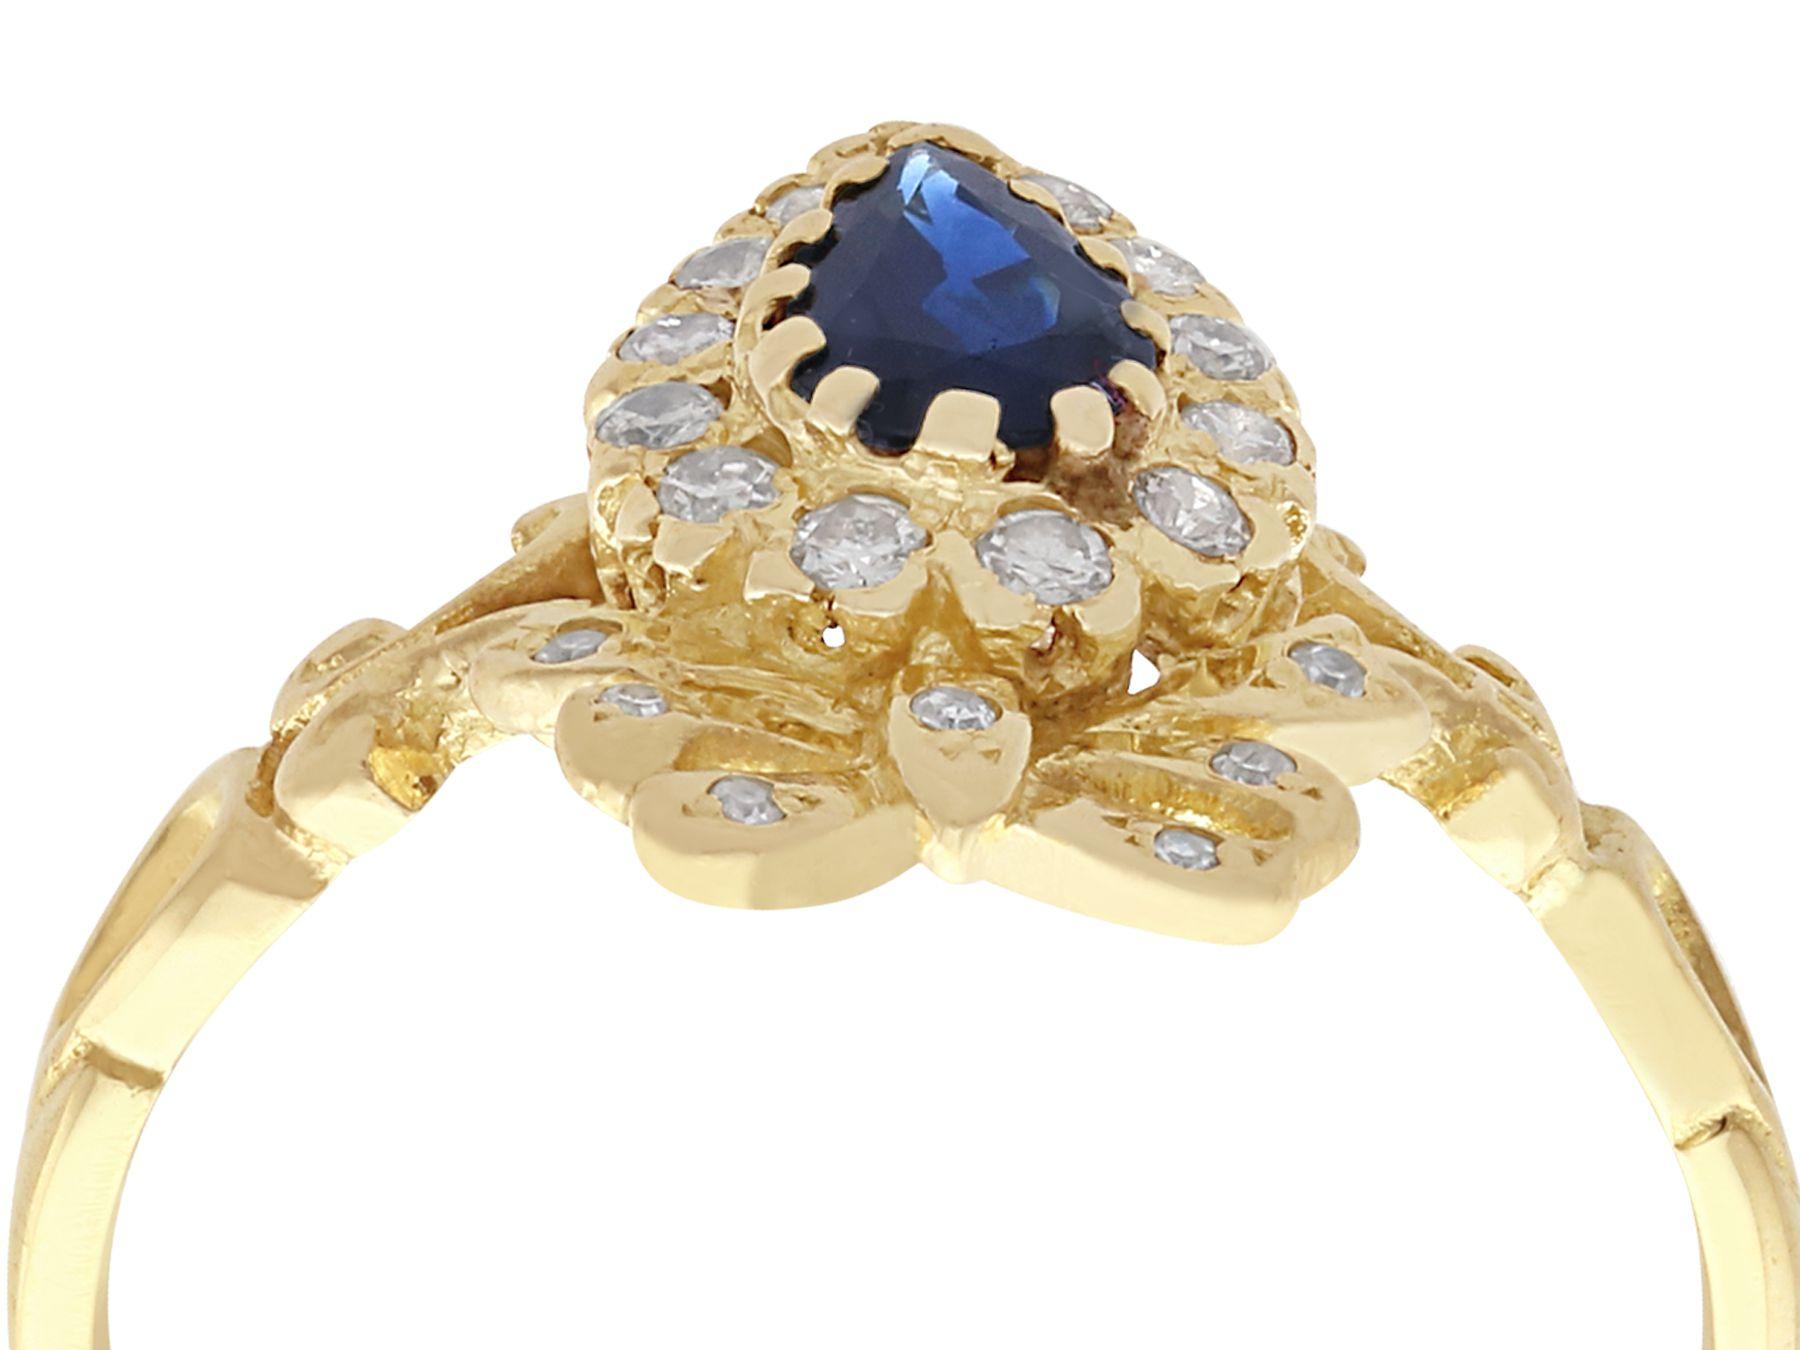 An impressive Victorian style vintage 0.45 carat sapphire and 0.20 carat diamond, 18 karat yellow gold cocktail ring; part of our diverse sapphire jewelry collections.

This fine and impressive Victorian style sapphire ring has been crafted in 18k